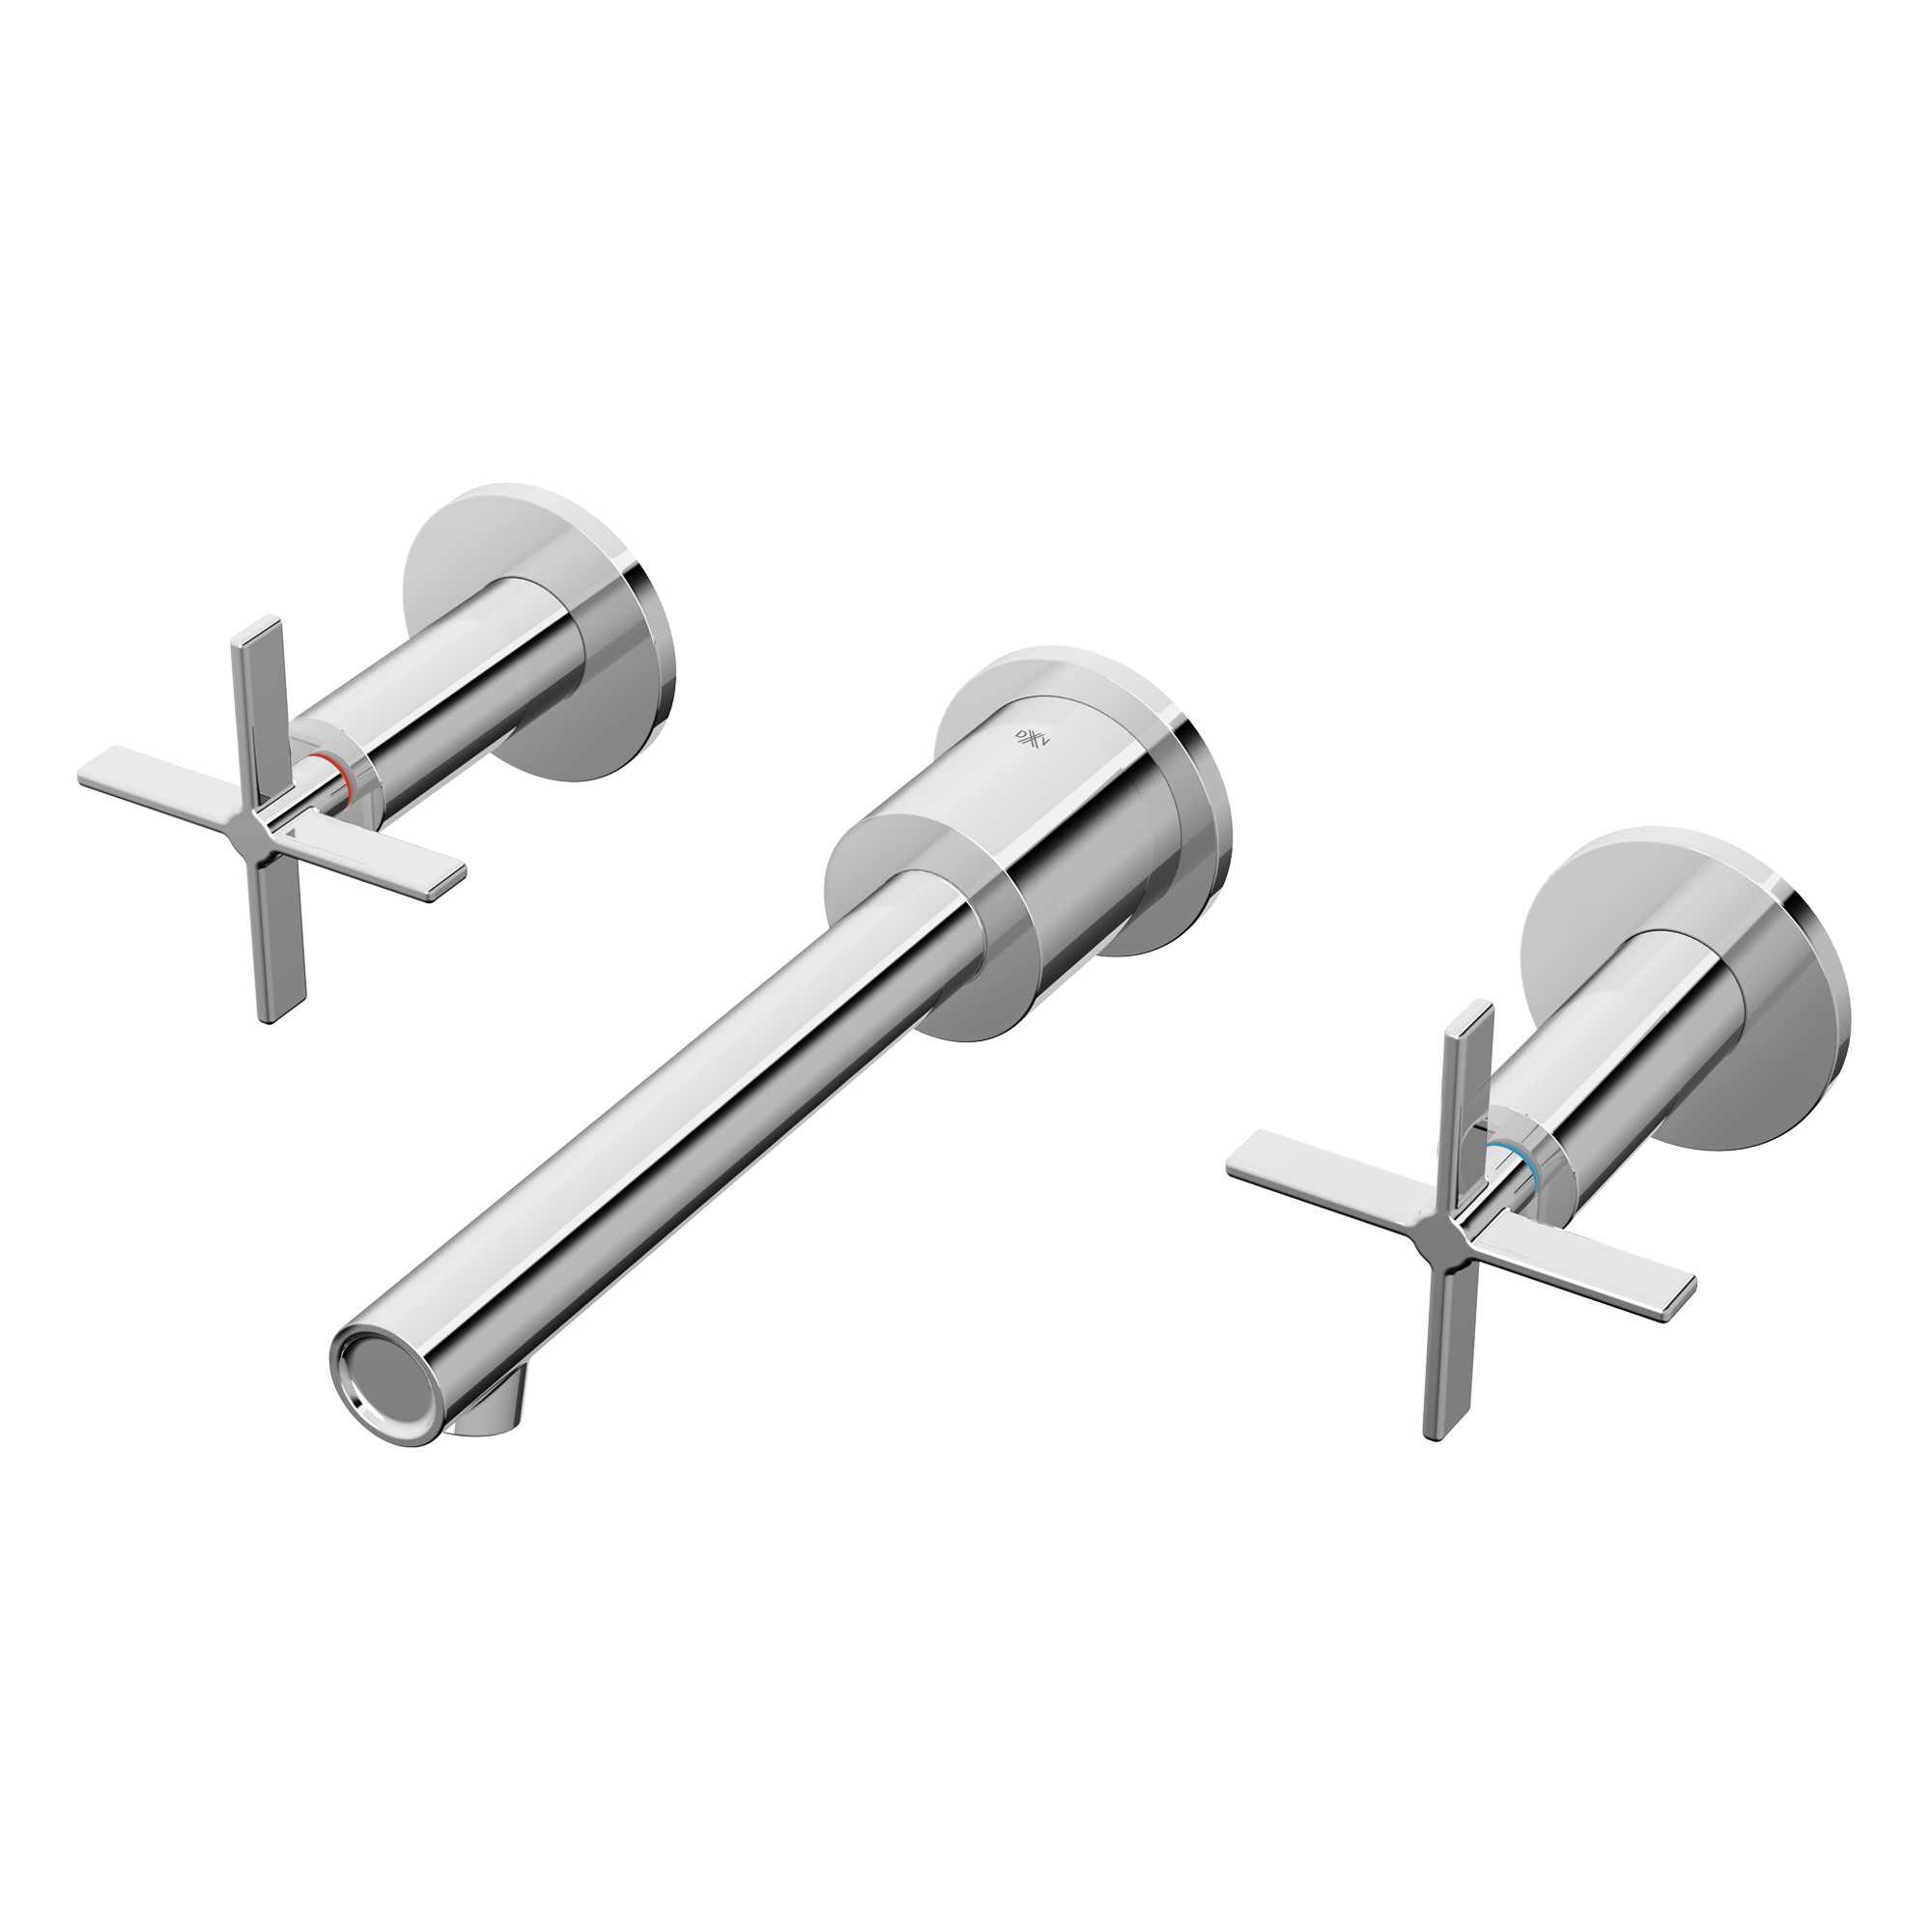 Percy® 2-Handle Wall Mounted Bathroom Faucet with Indicator Markings and Cross Handles